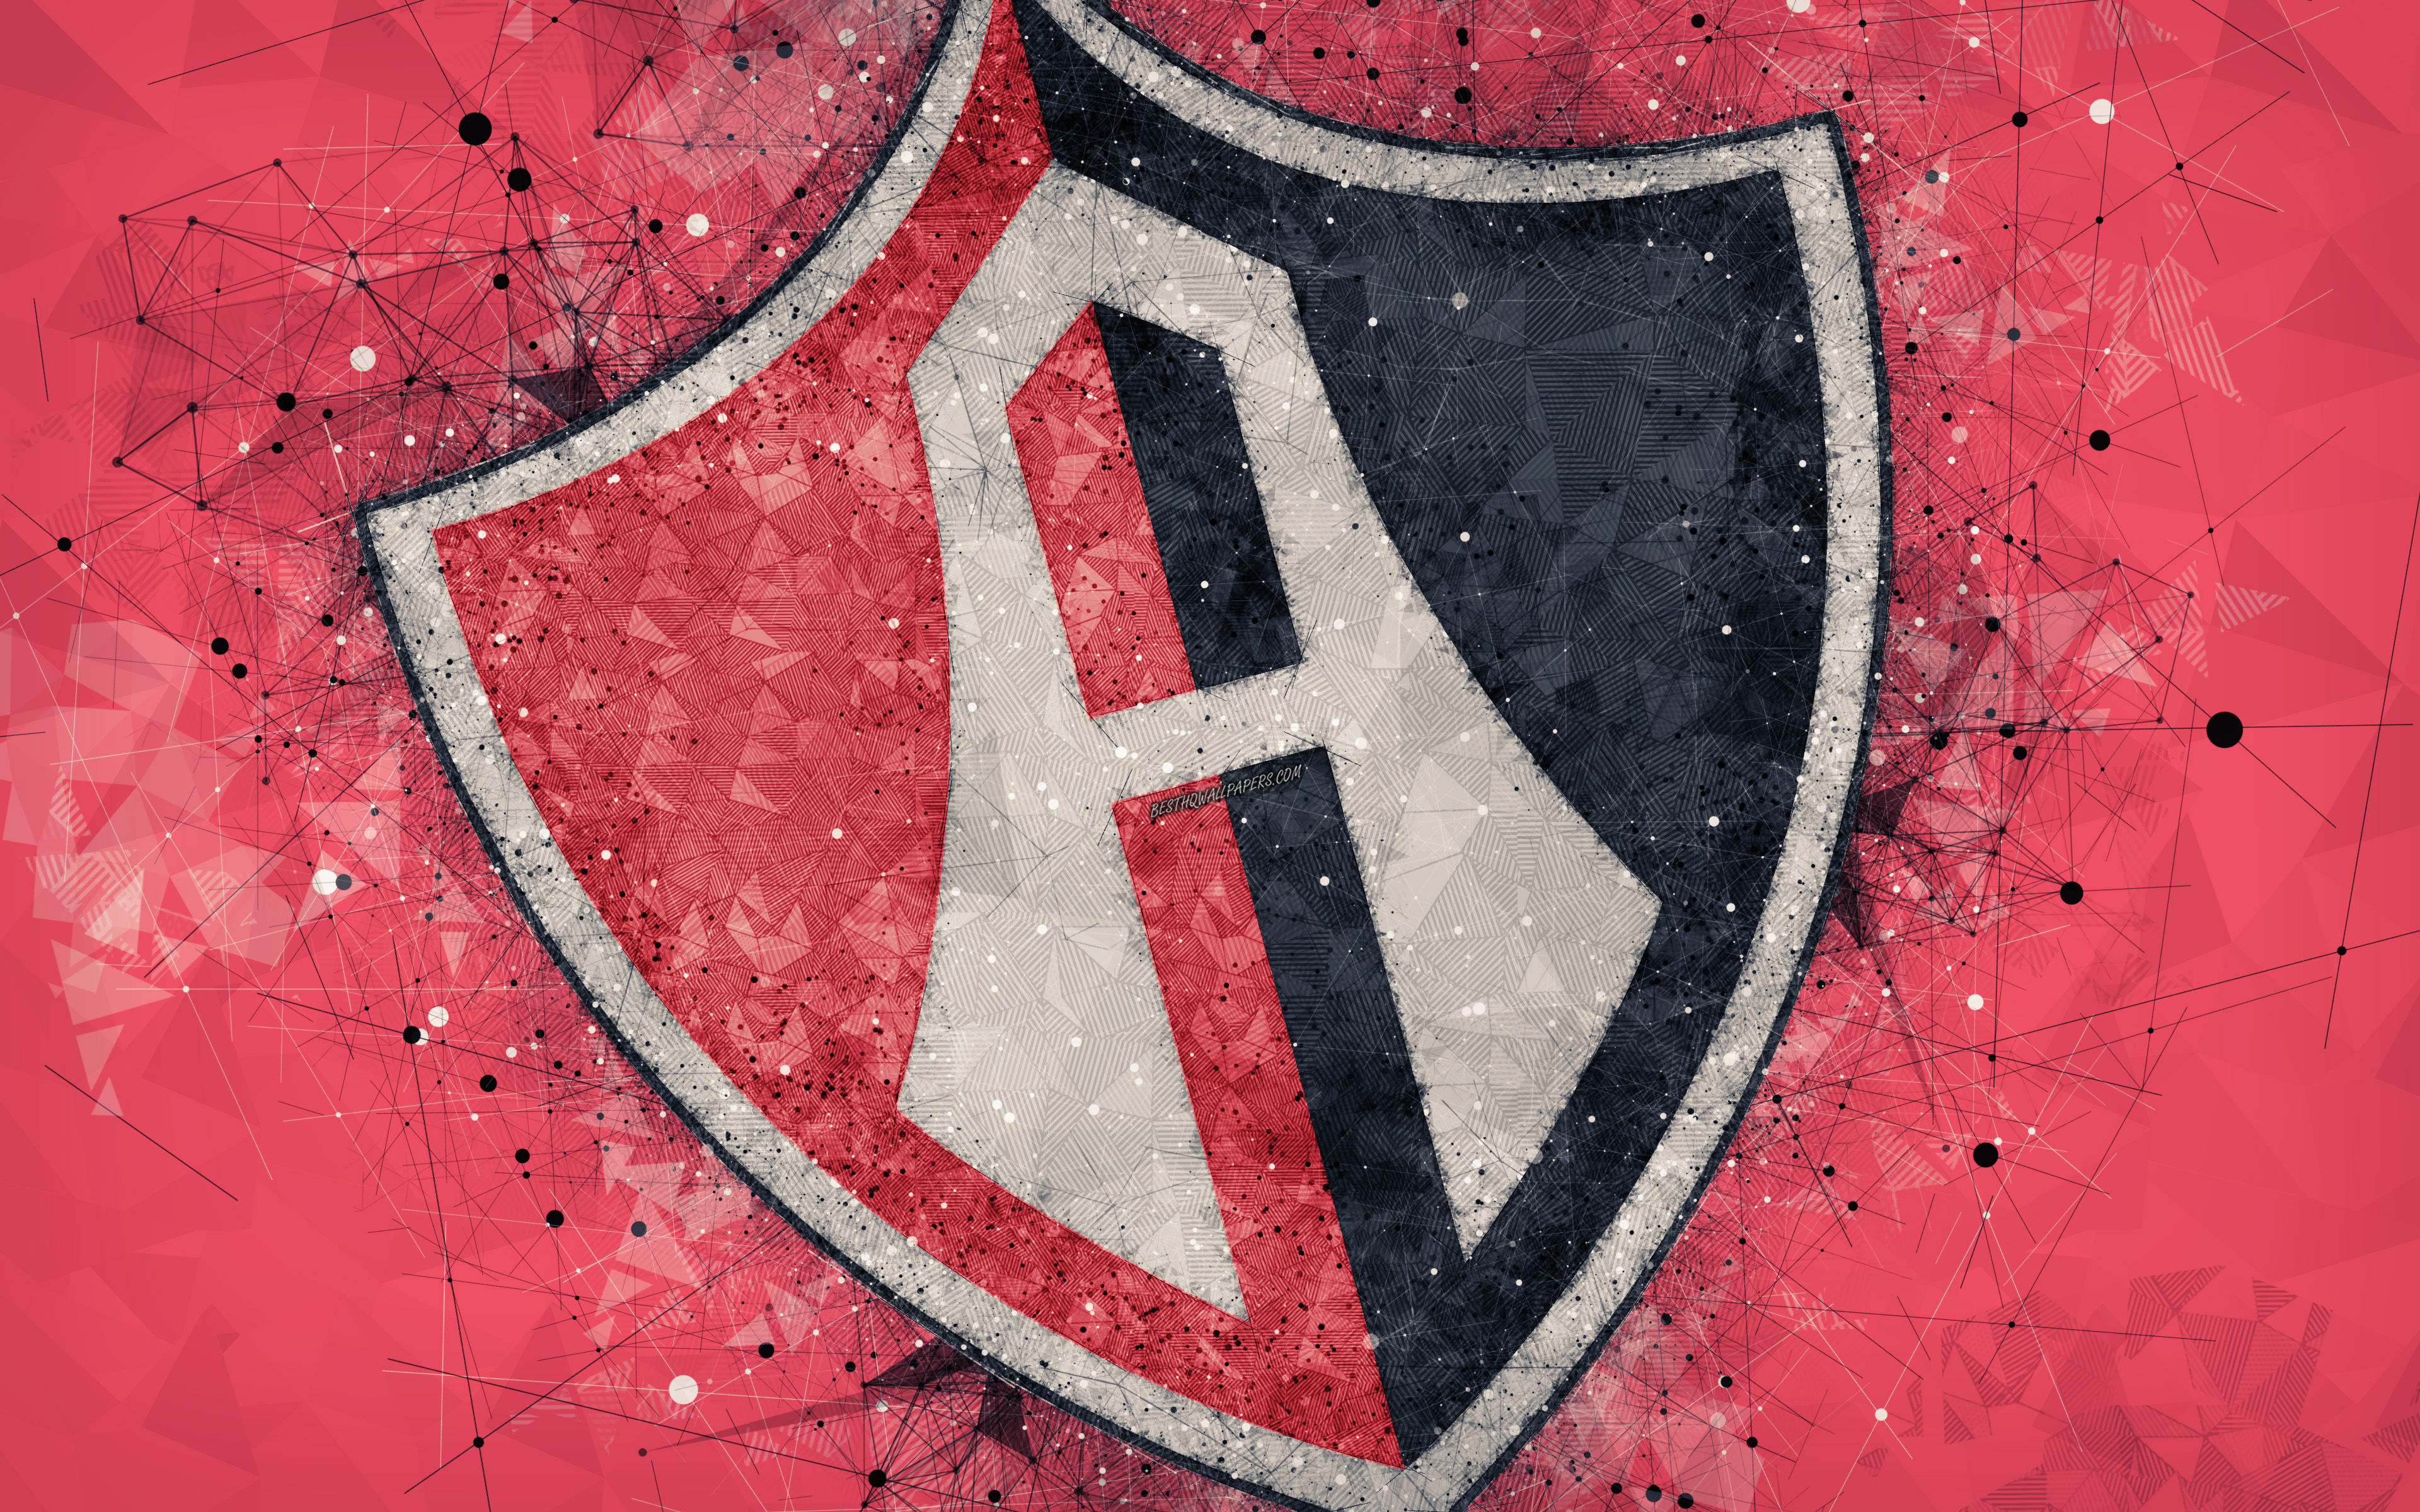 Download wallpapers club atlas k geometric art logo mexican football club red abstract background primera division guadalajara mexico football liga mx atlas fc for desktop with resolution x high quality hd pictures